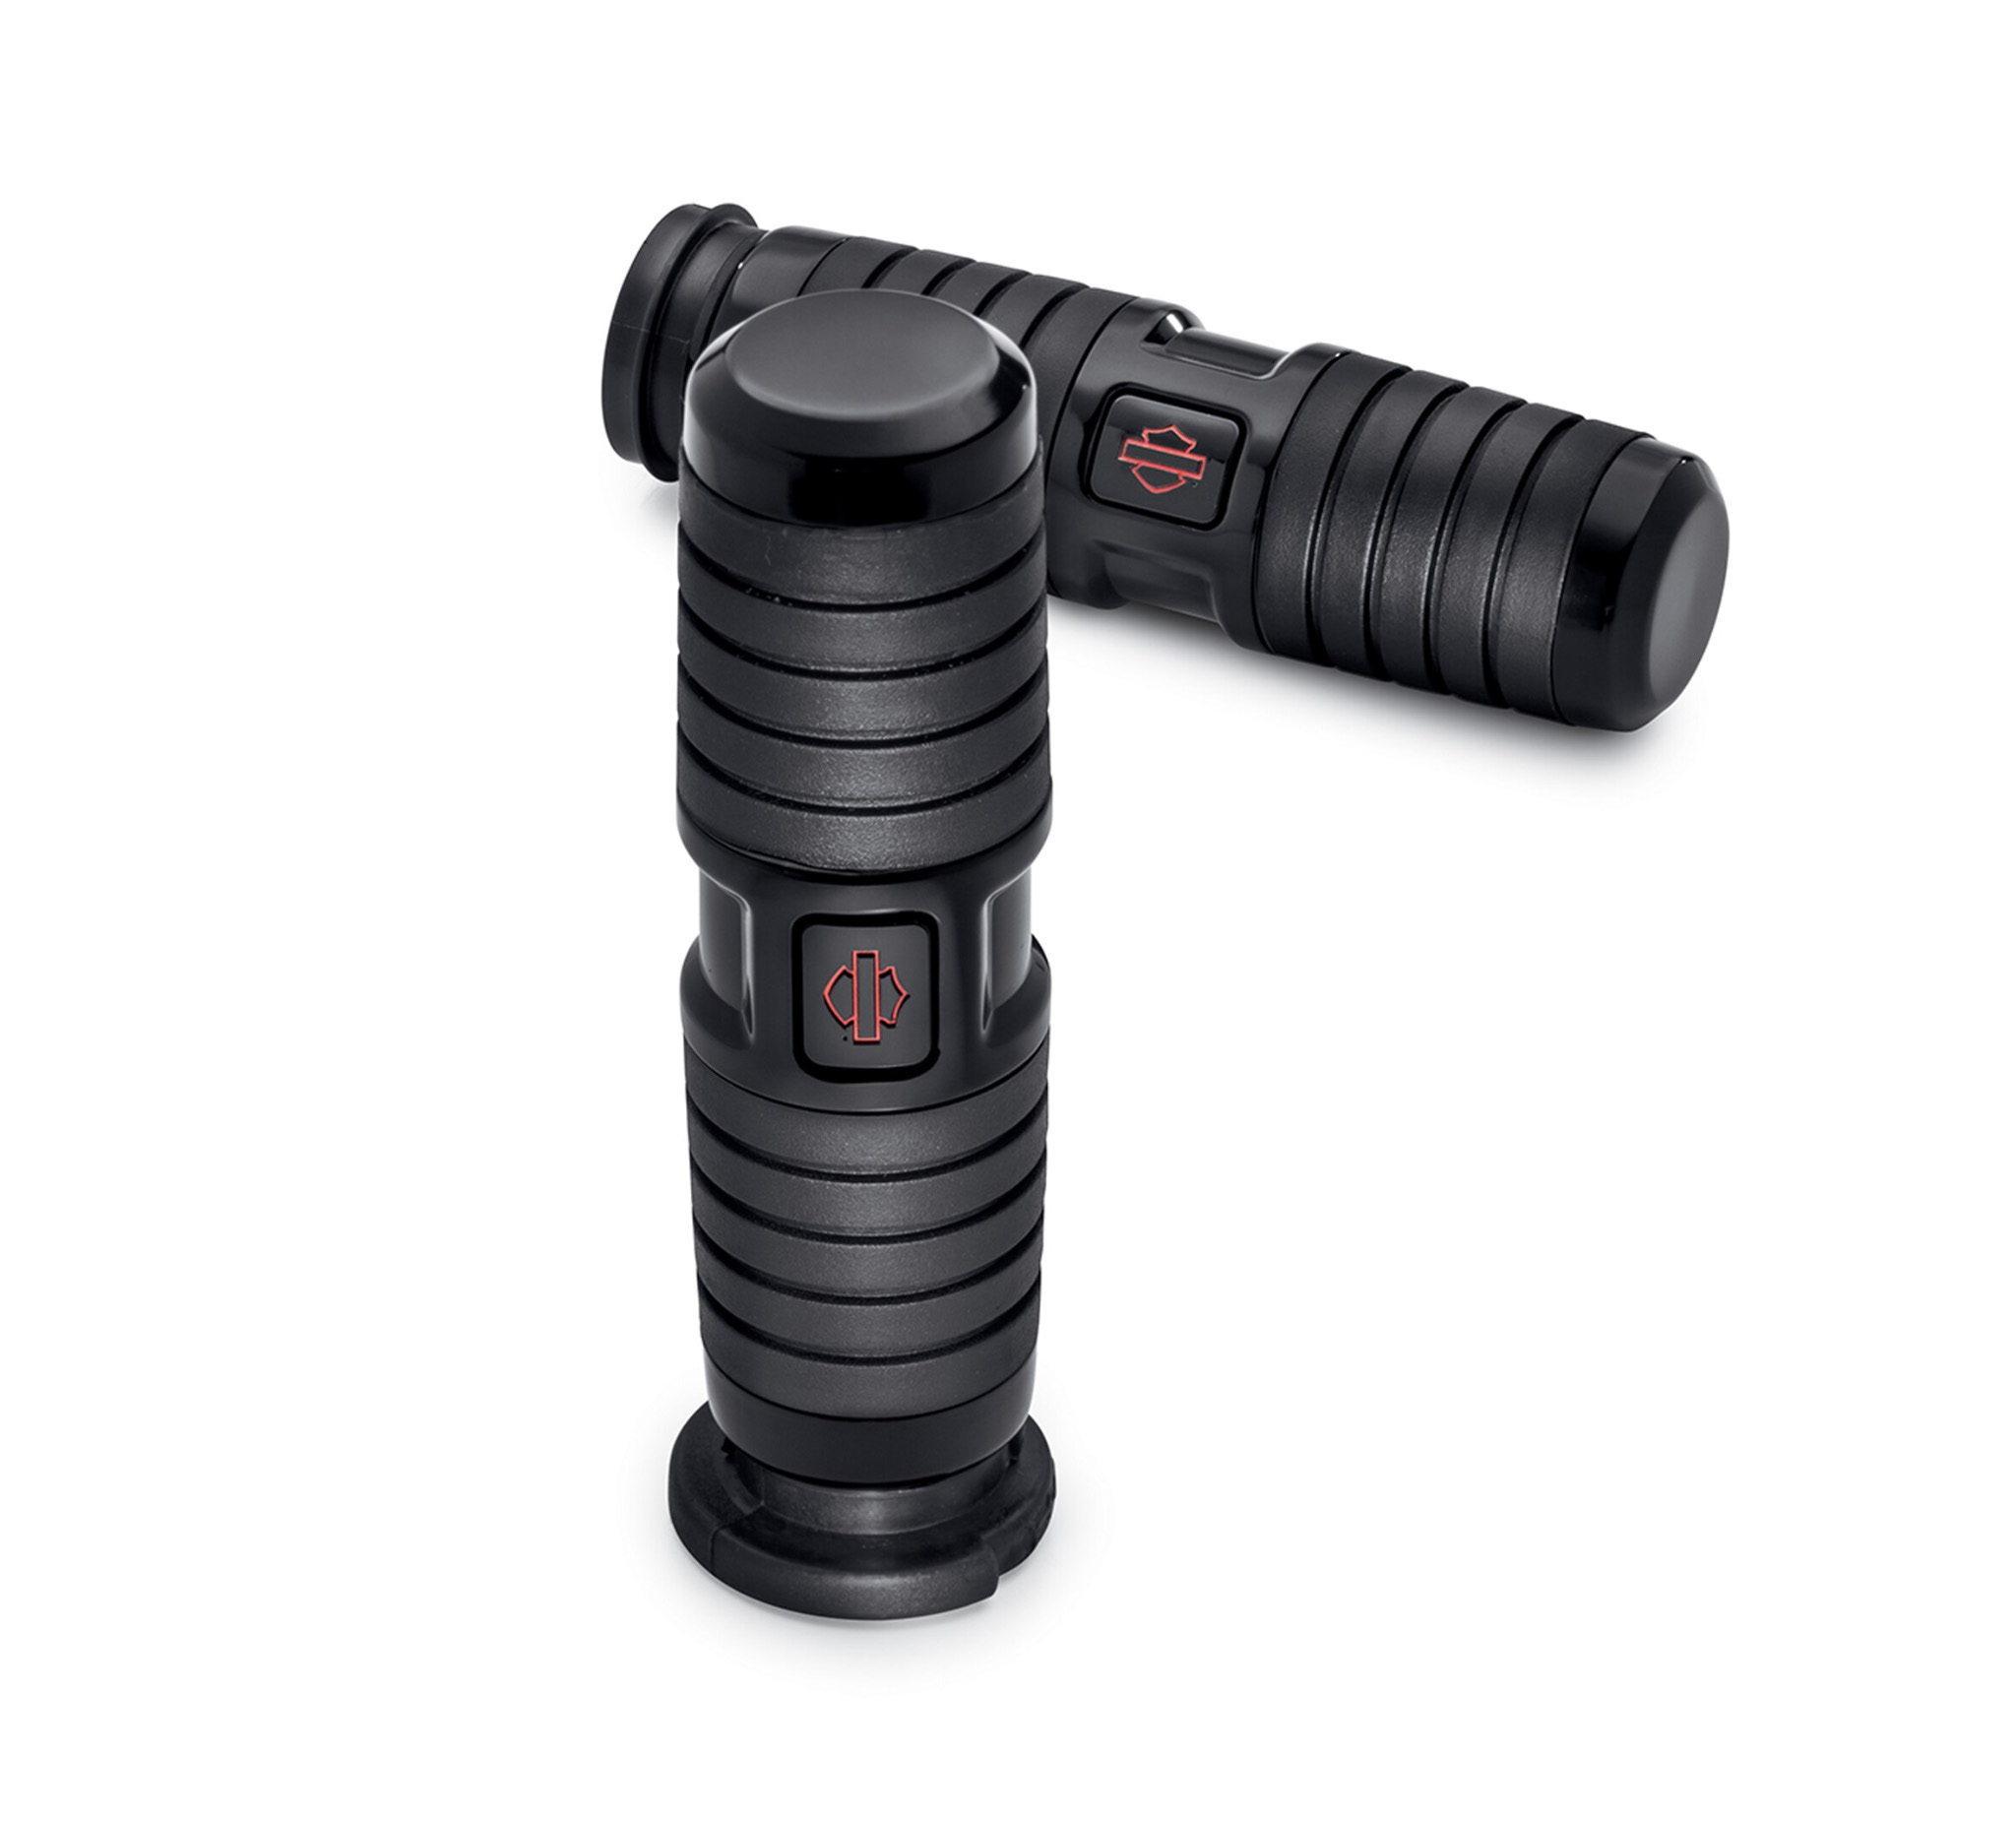 New Harley Davidson Kahuna Heated Grips for the Heritage Classic